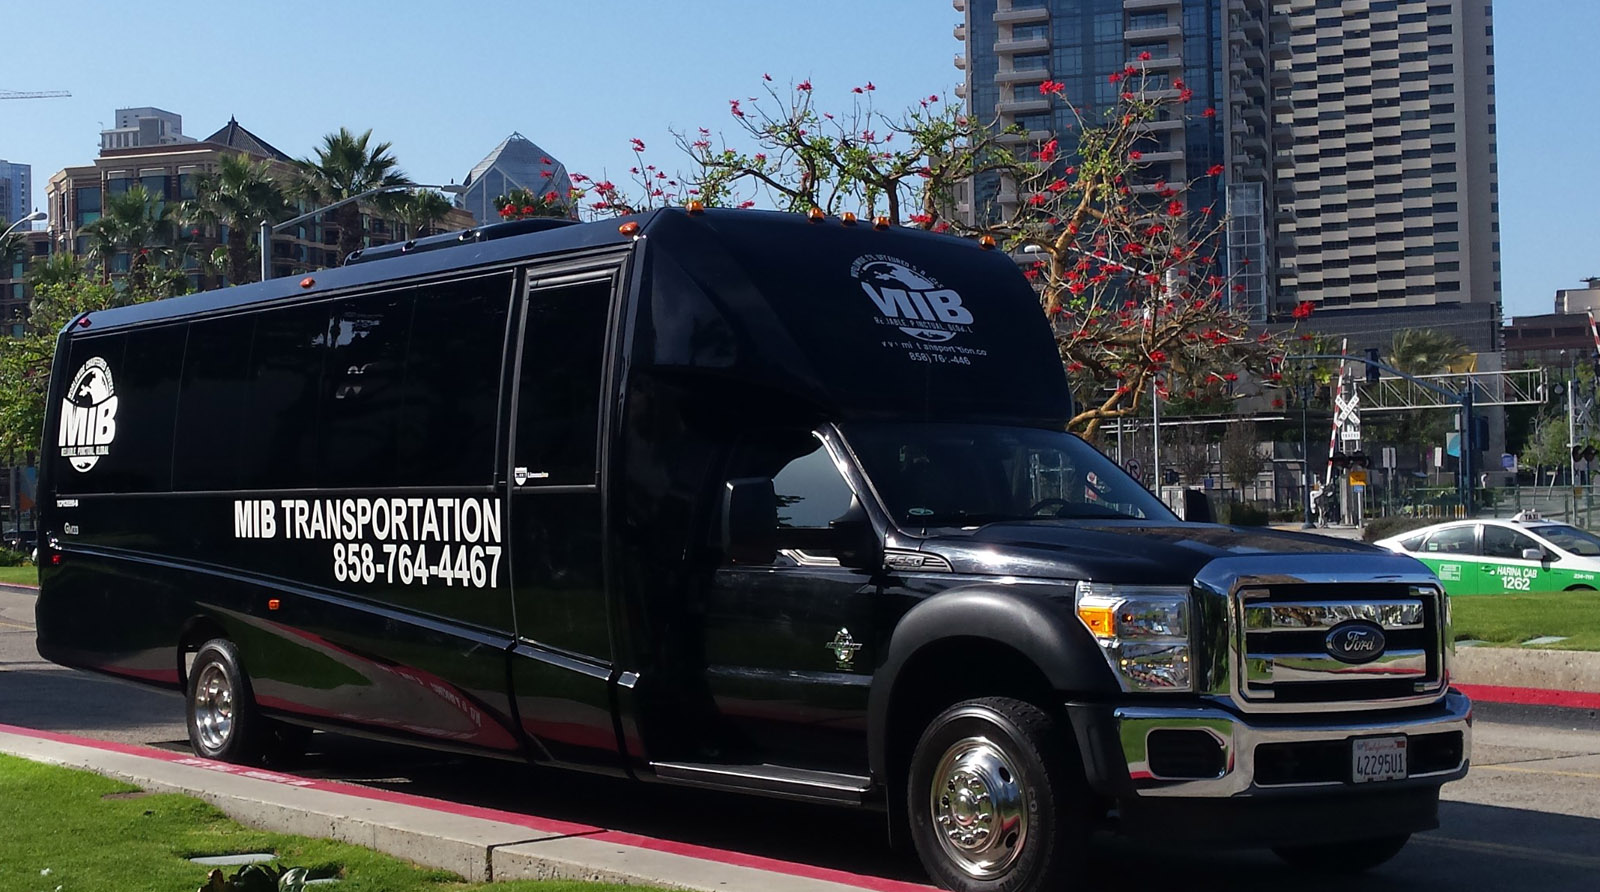 Prom Buses in San Diego